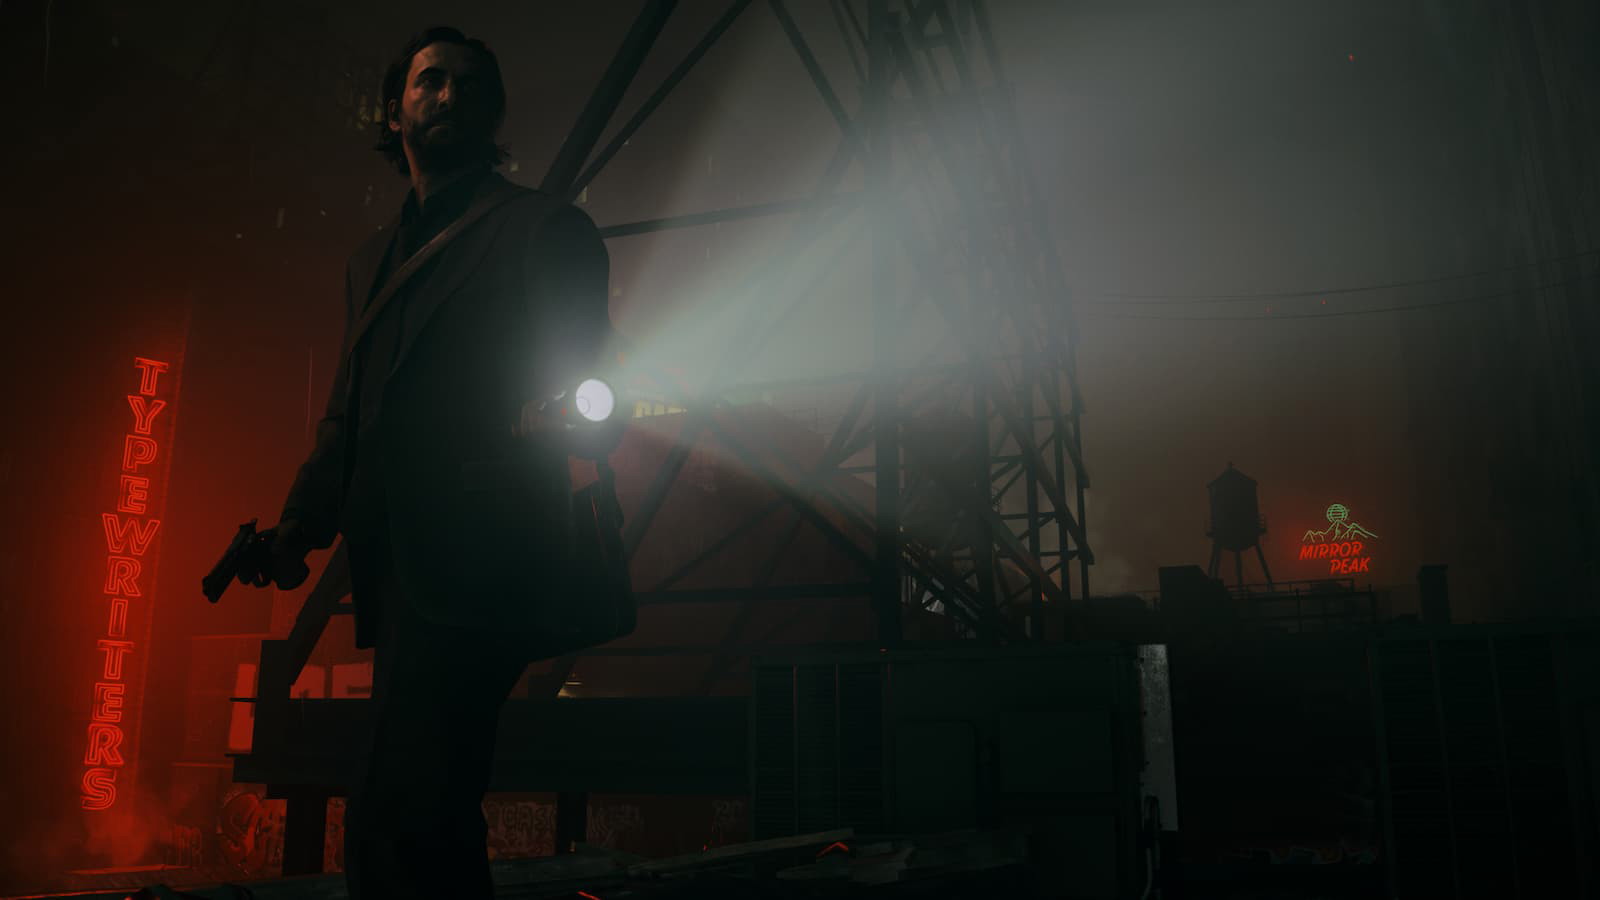 Biggest issue with the area in Alan Wake 2 was how it was too dark for the player to explore